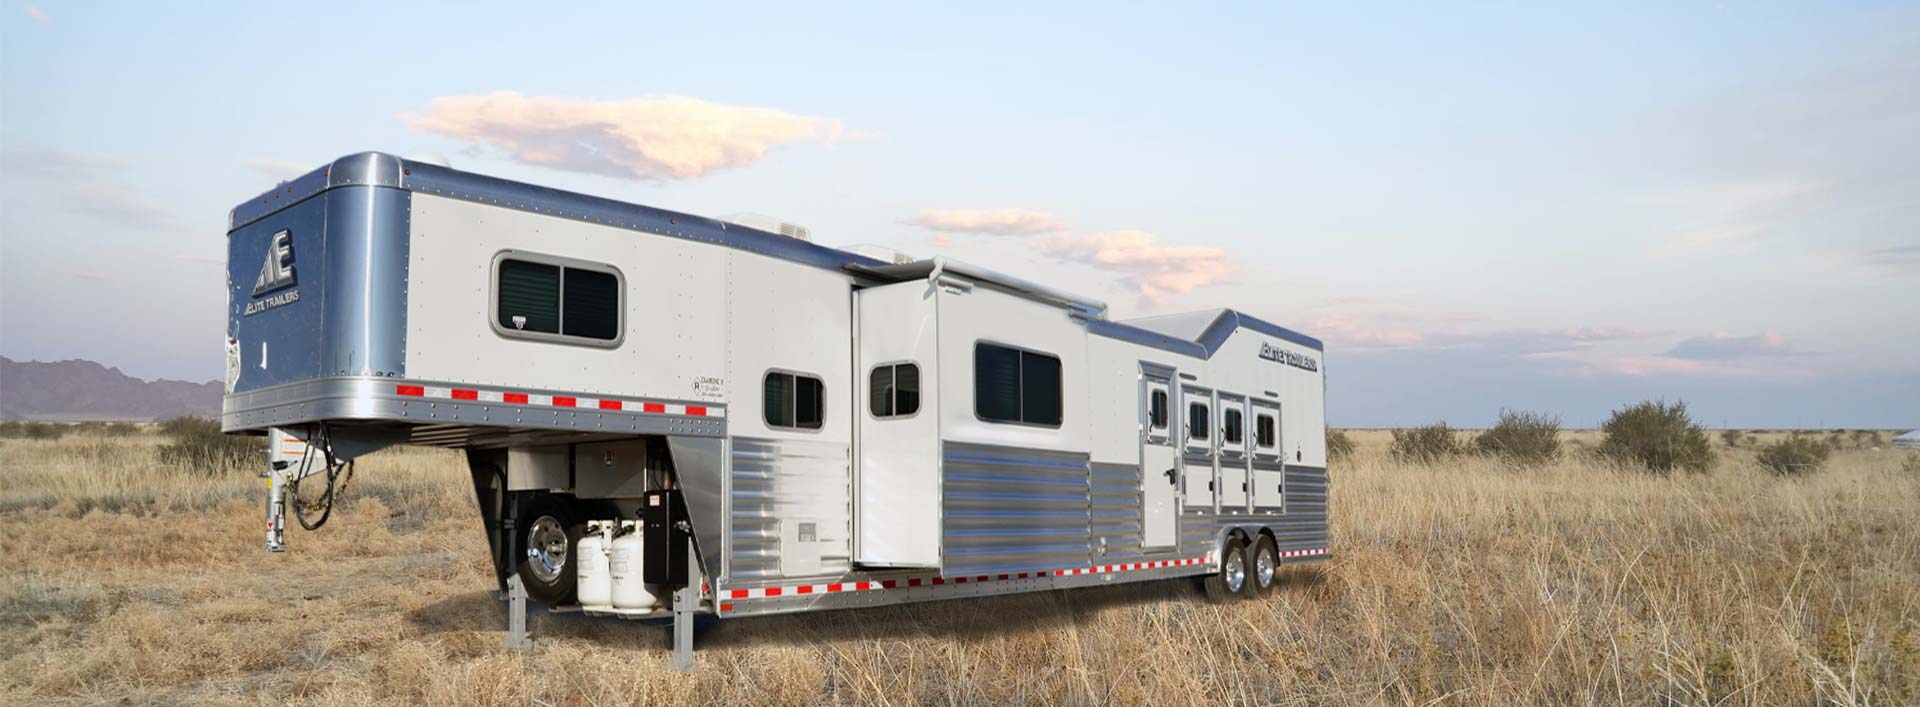 Horse Trailers for ranchers